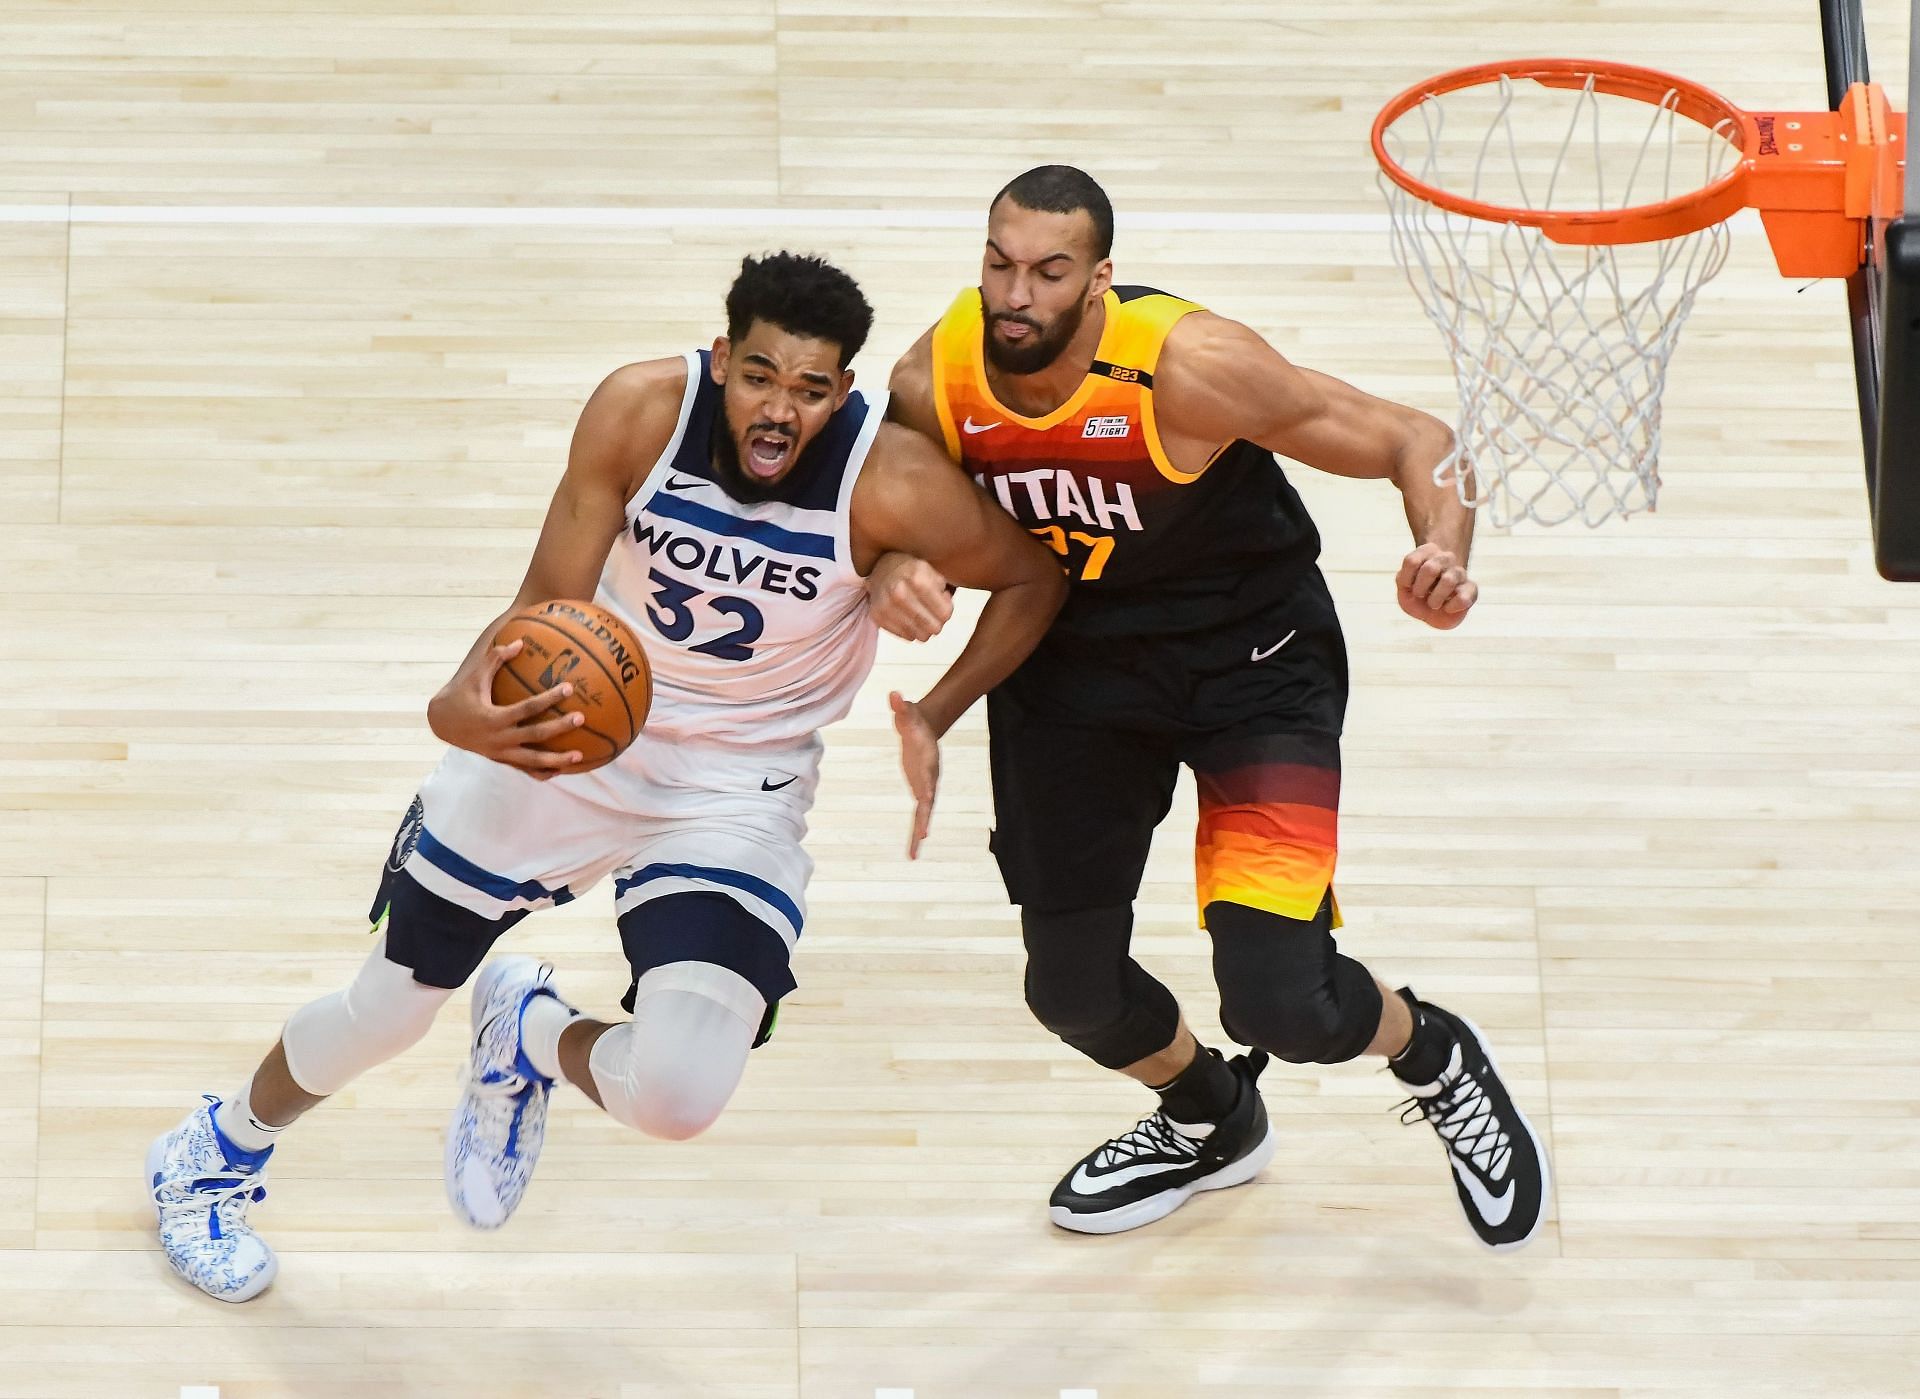 Rivals turn partners as Rudy Gobert leaves Donovan Mitchell for Karl-Anthony Towns of the Minnesota Timberwolves.